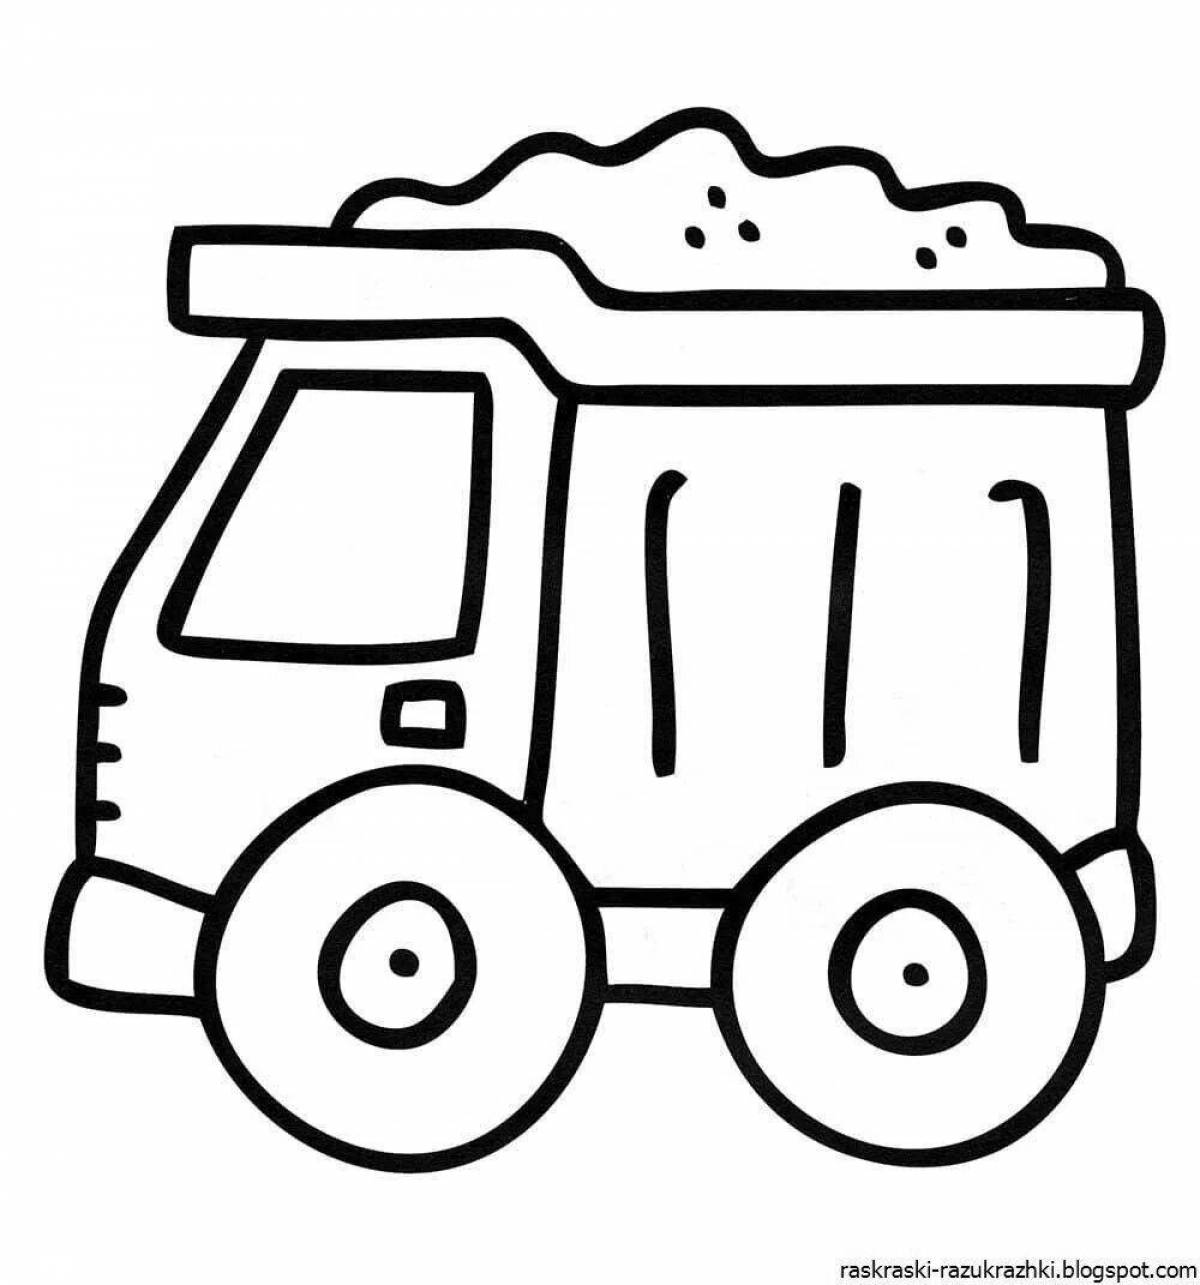 Coloring pages adorable cars for boys 4 years old